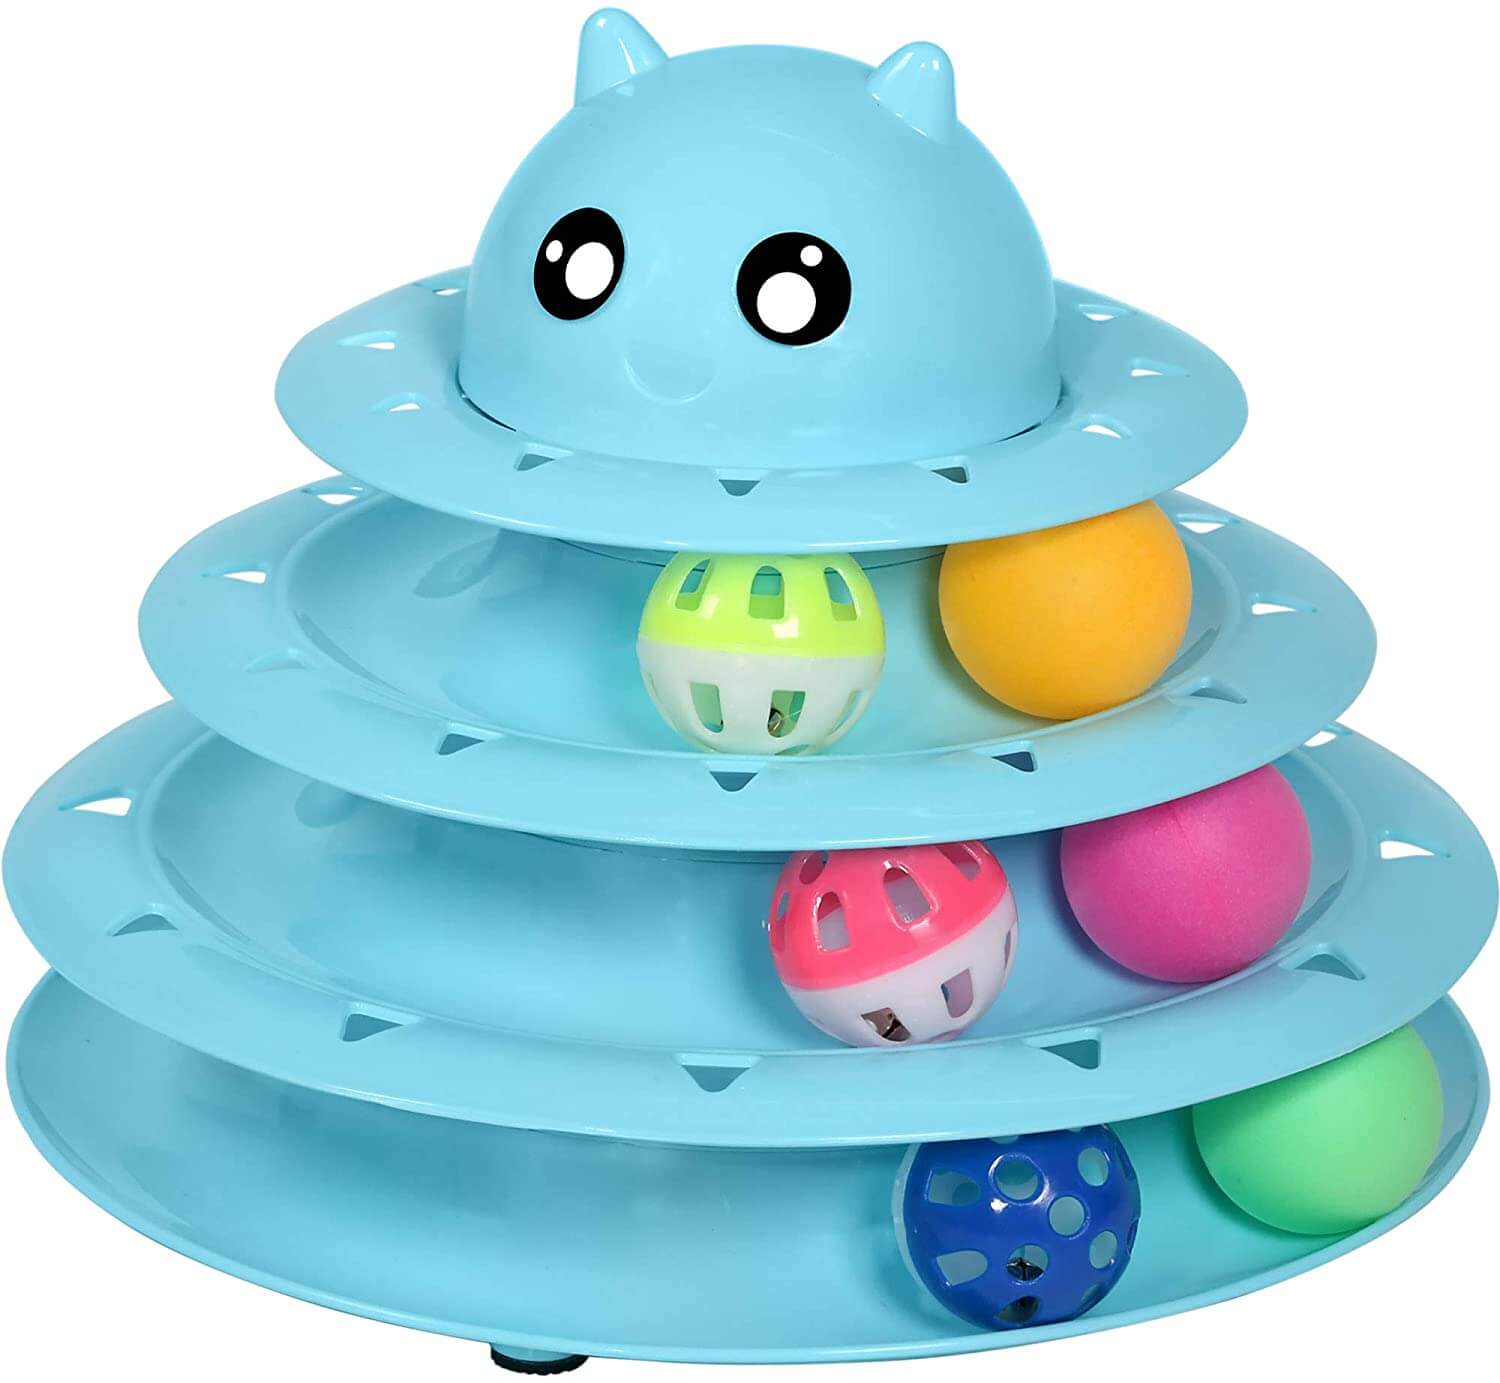 UPSKY Cat Toy Roller 3-Level Turntable